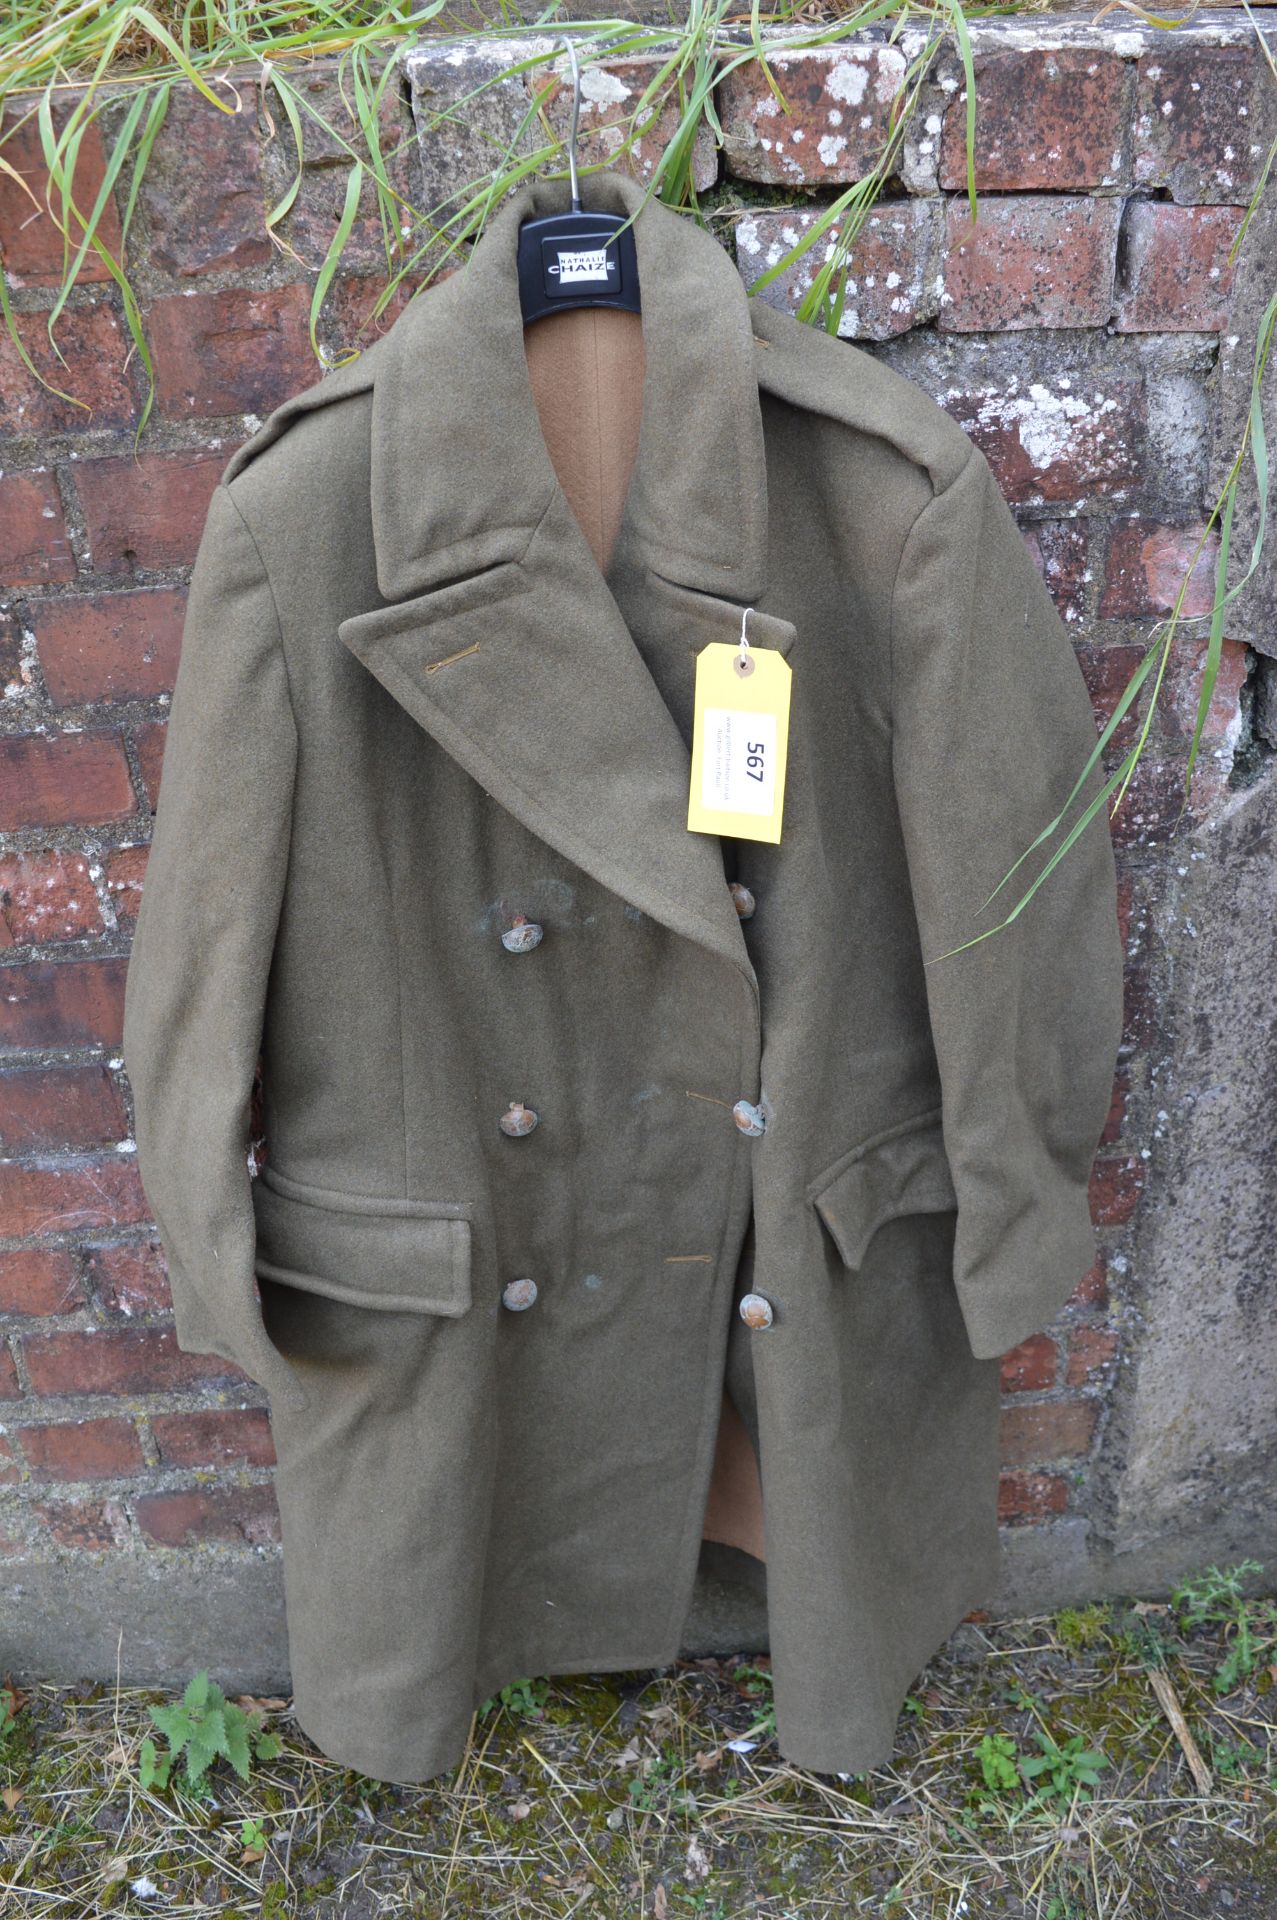 Army Greatcoat dated 1944